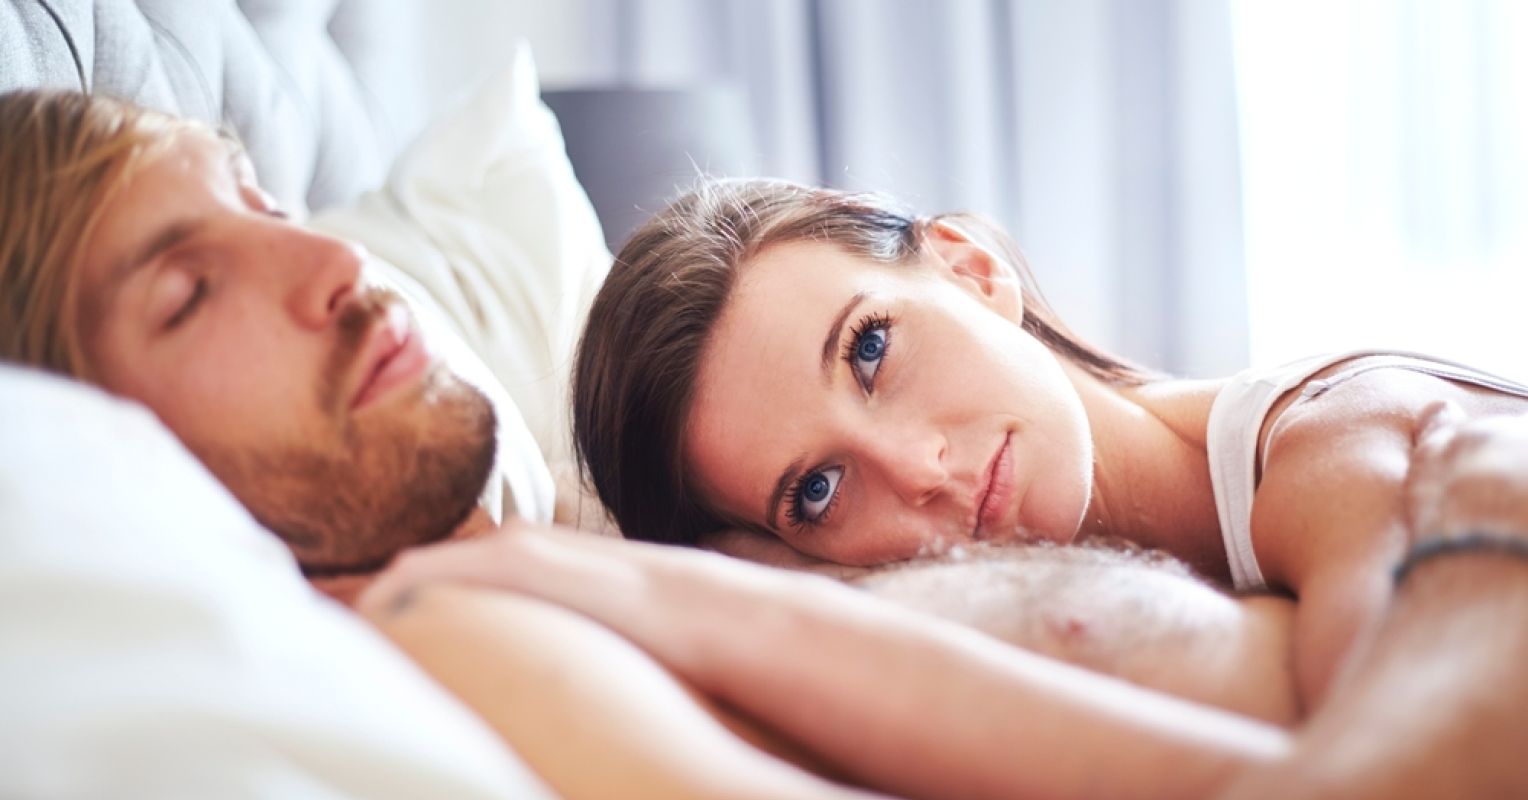 3 Ways Infidelity Changes a Relationship Psychology Today